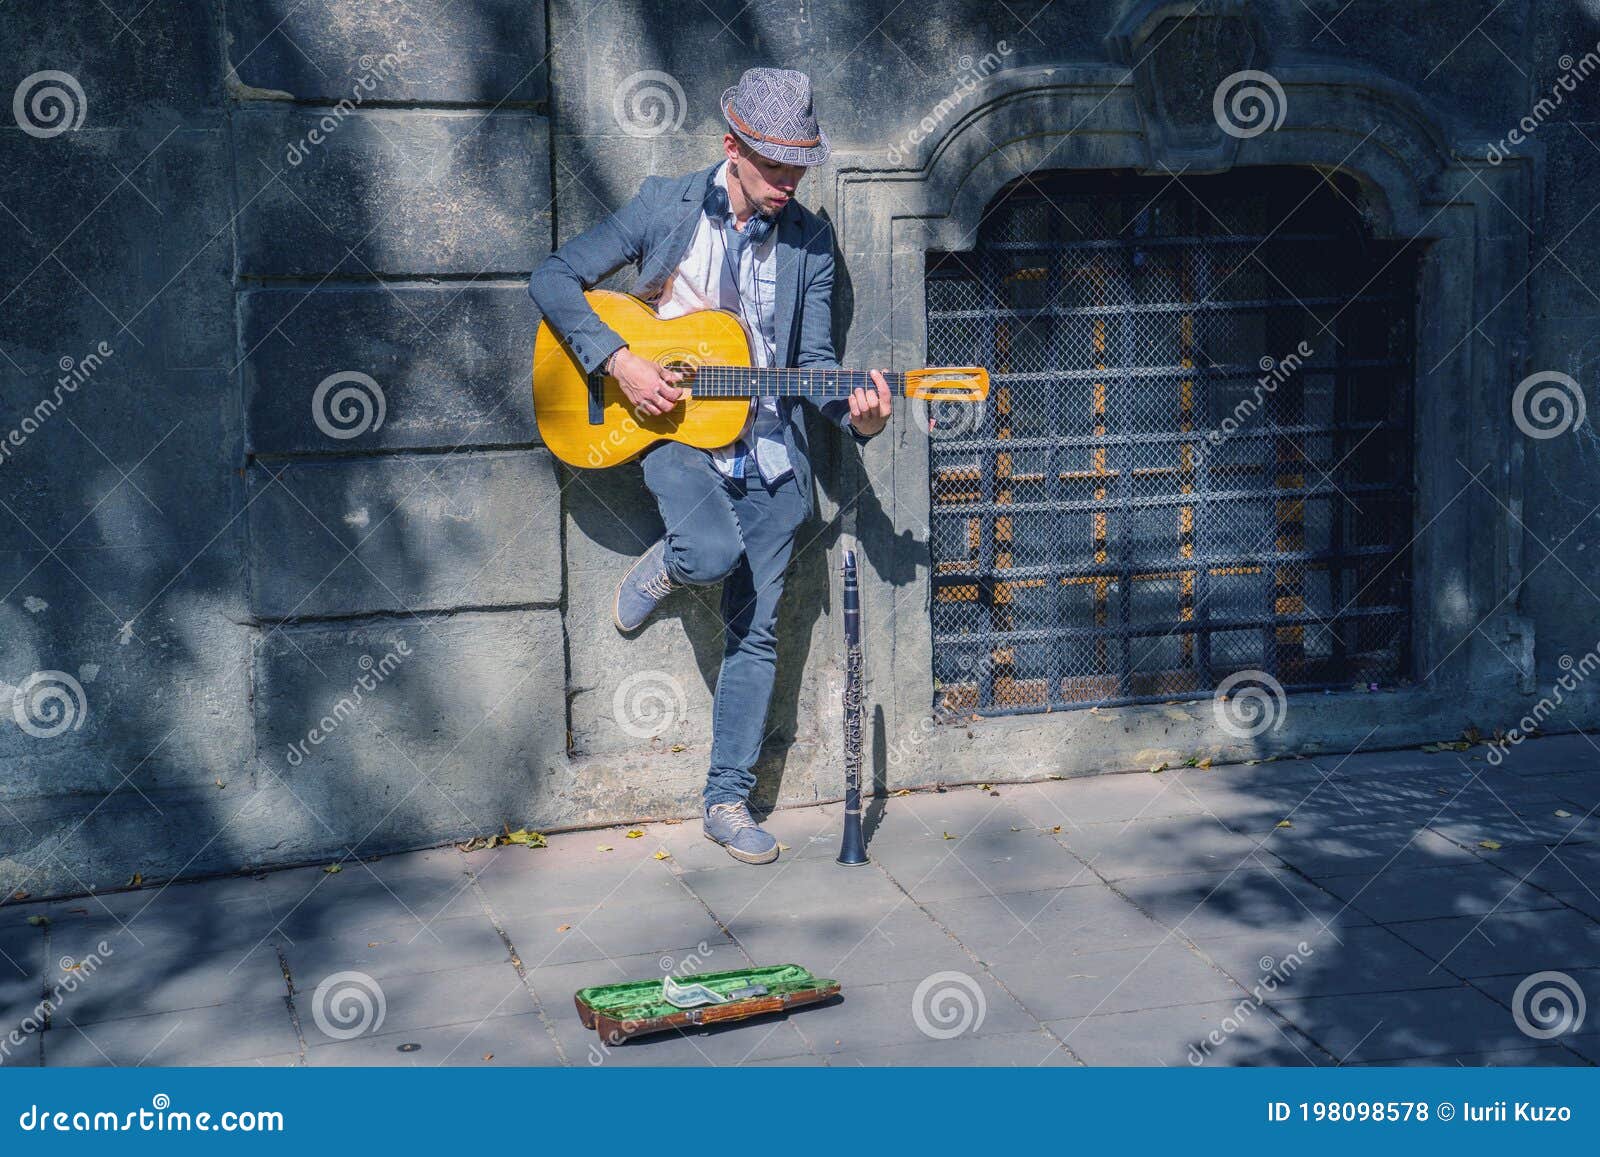 a busker street musician playing music with guitar on a city sidewalk